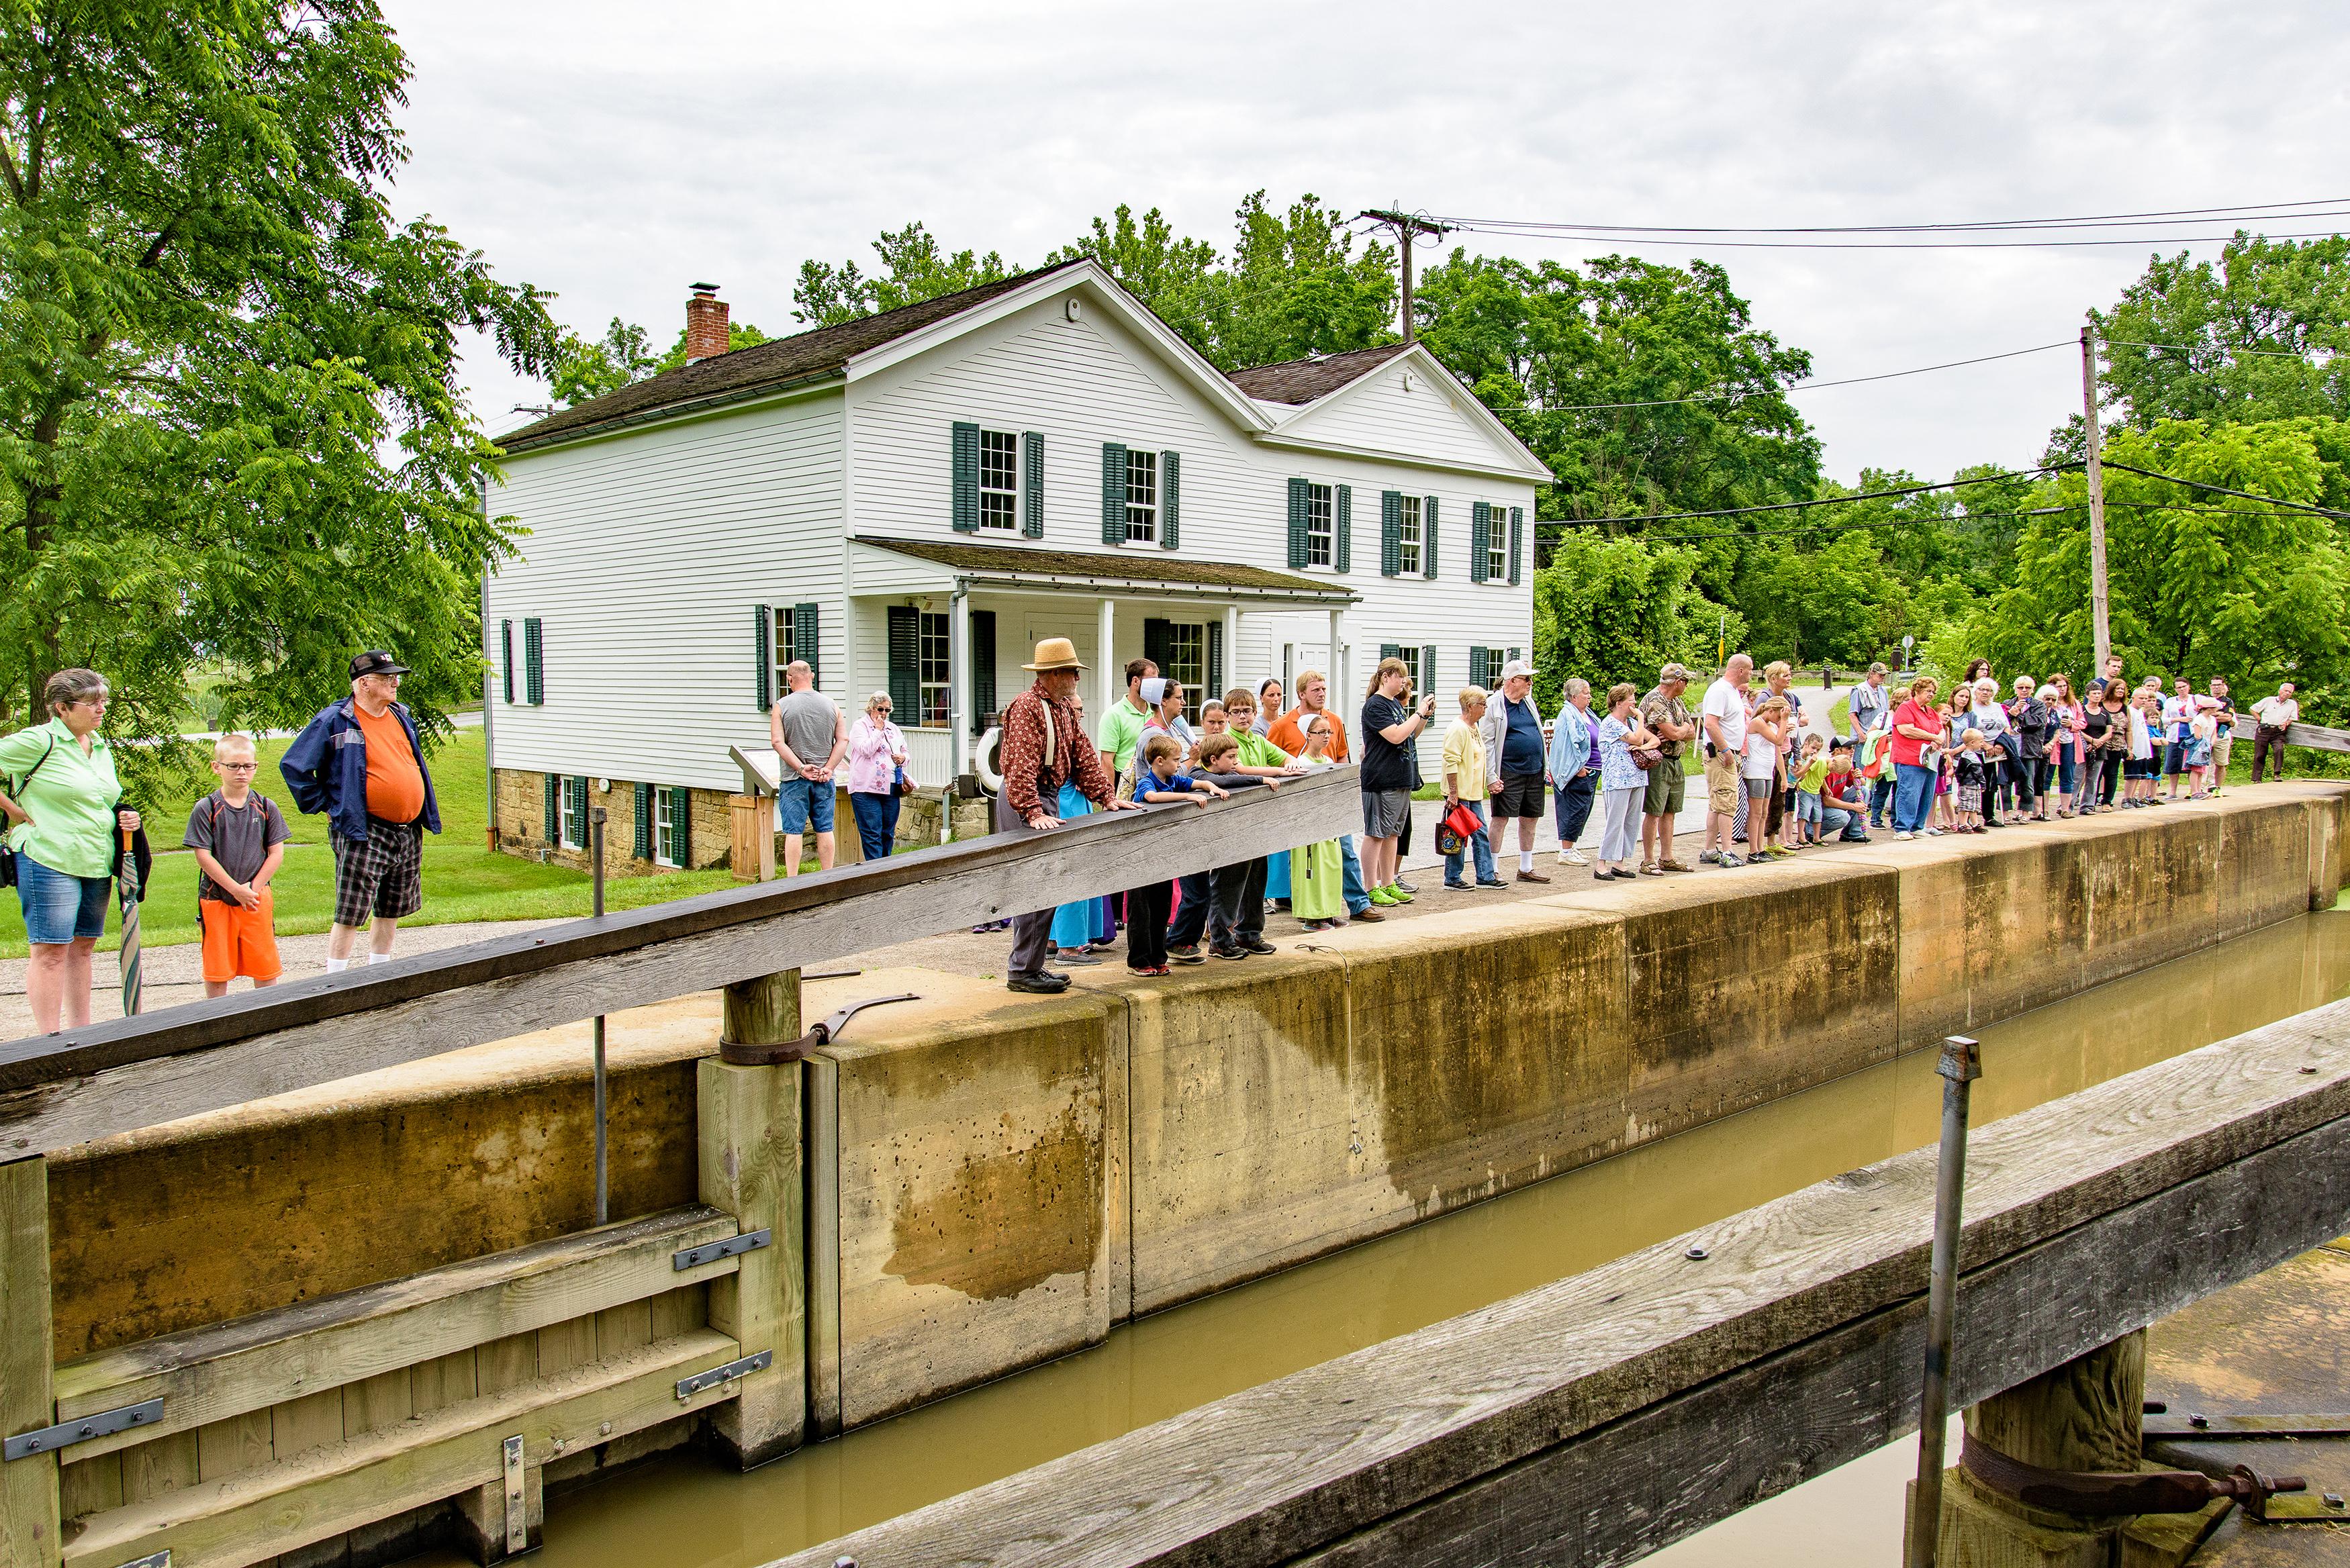 Visitors line the concrete edge of a canal lock filled with water, in front of a white building.